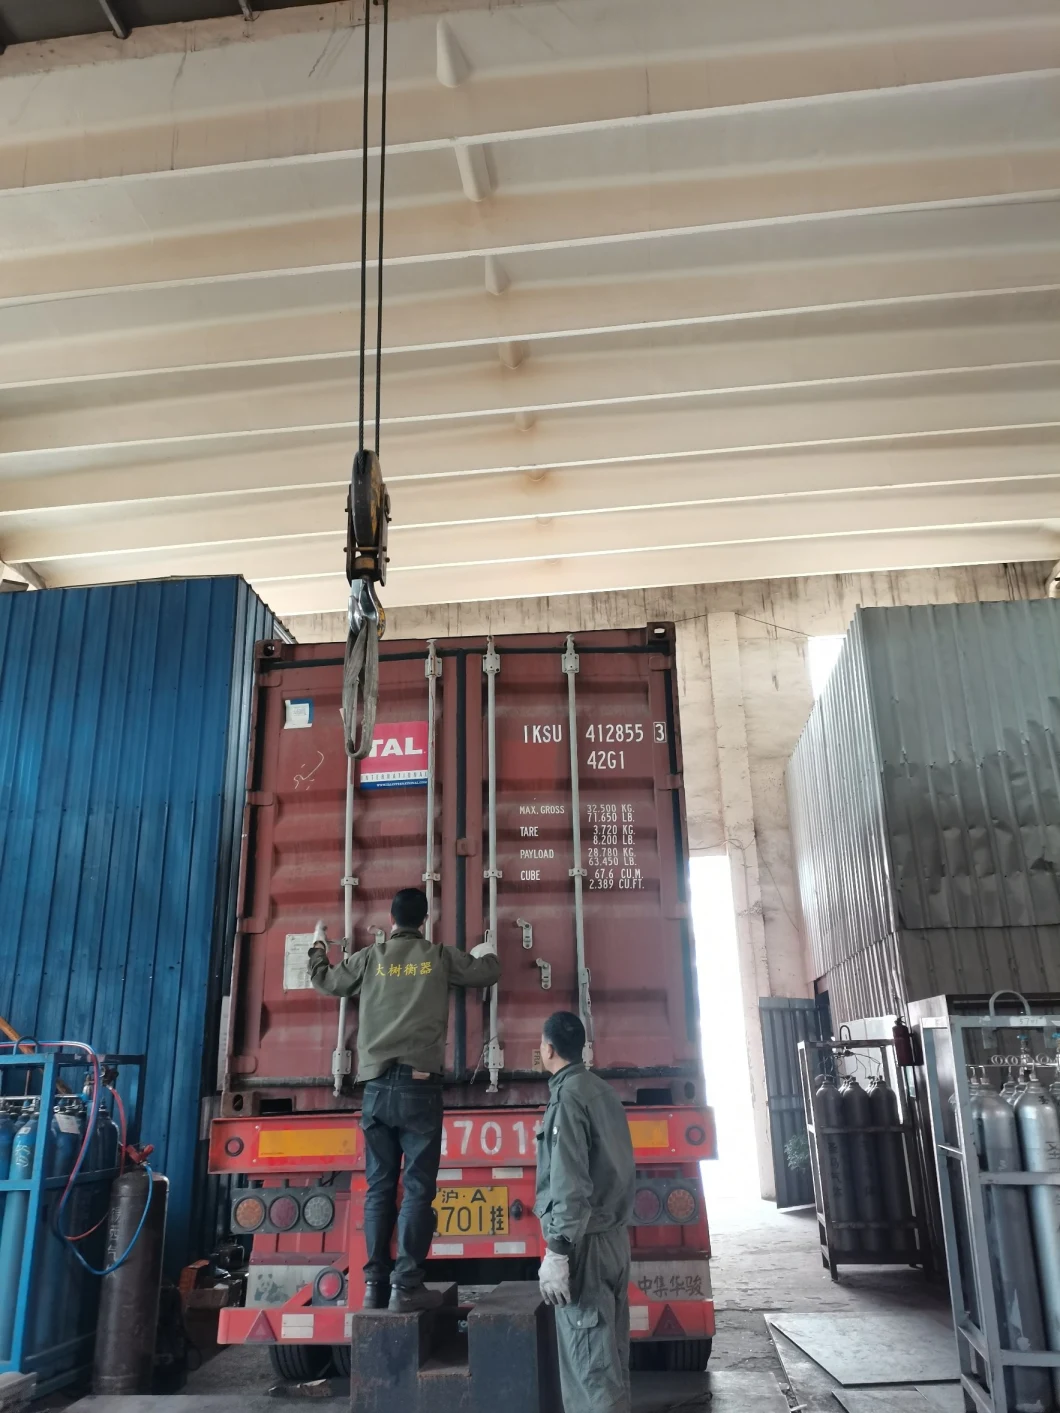 Industrial Boiler Steam Boiler Project Install in China